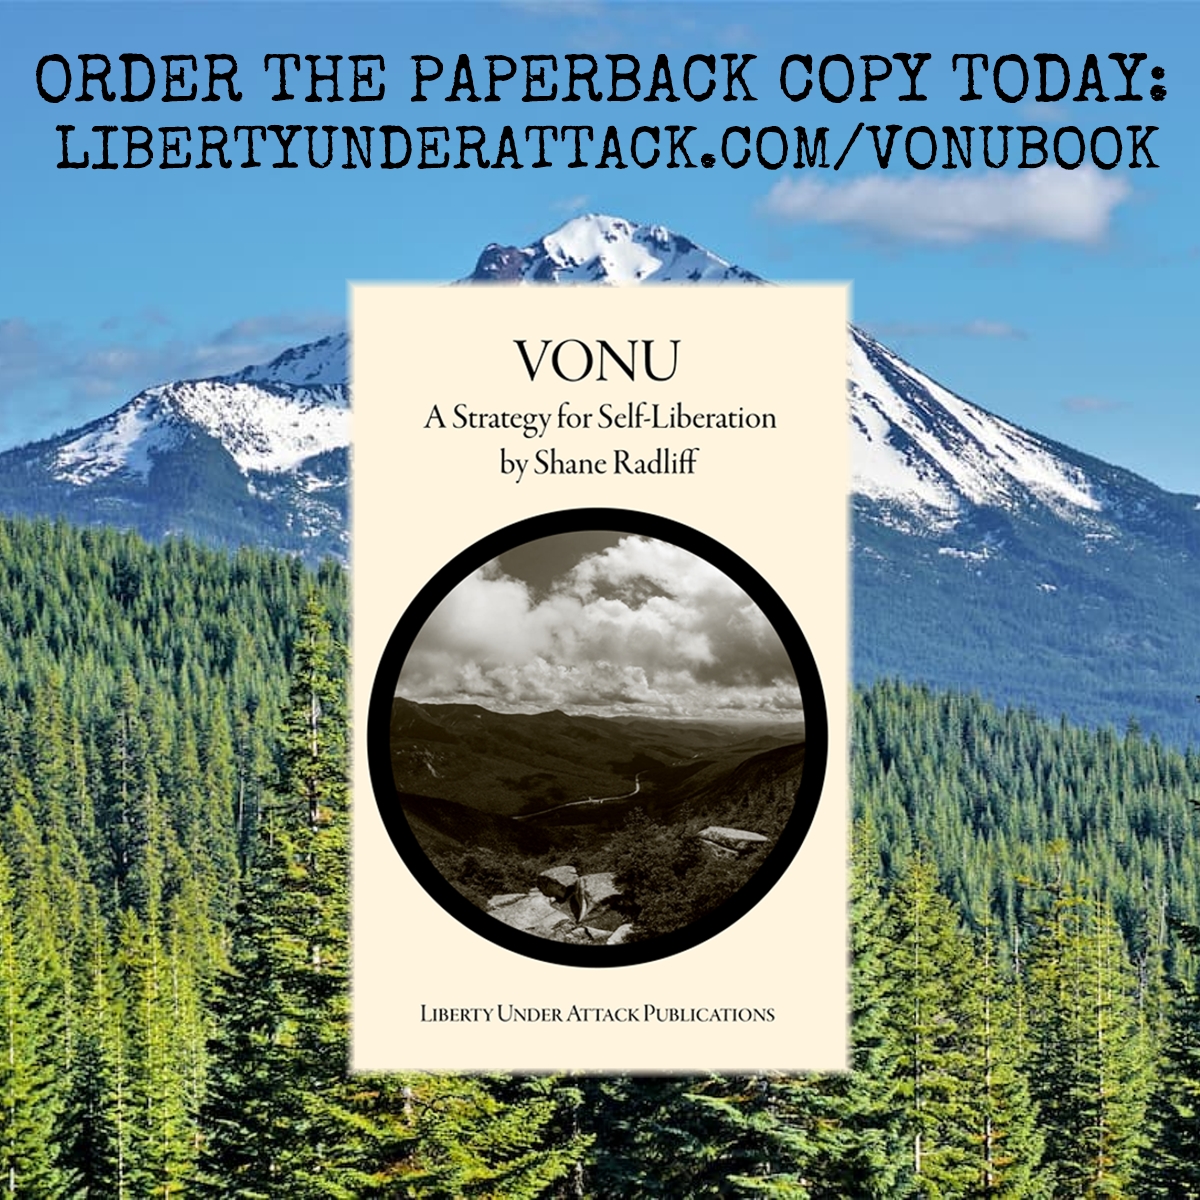 Vonu: A Strategy For Self-Liberation by Shane Radliff (#FREEAUDIOBOOK)